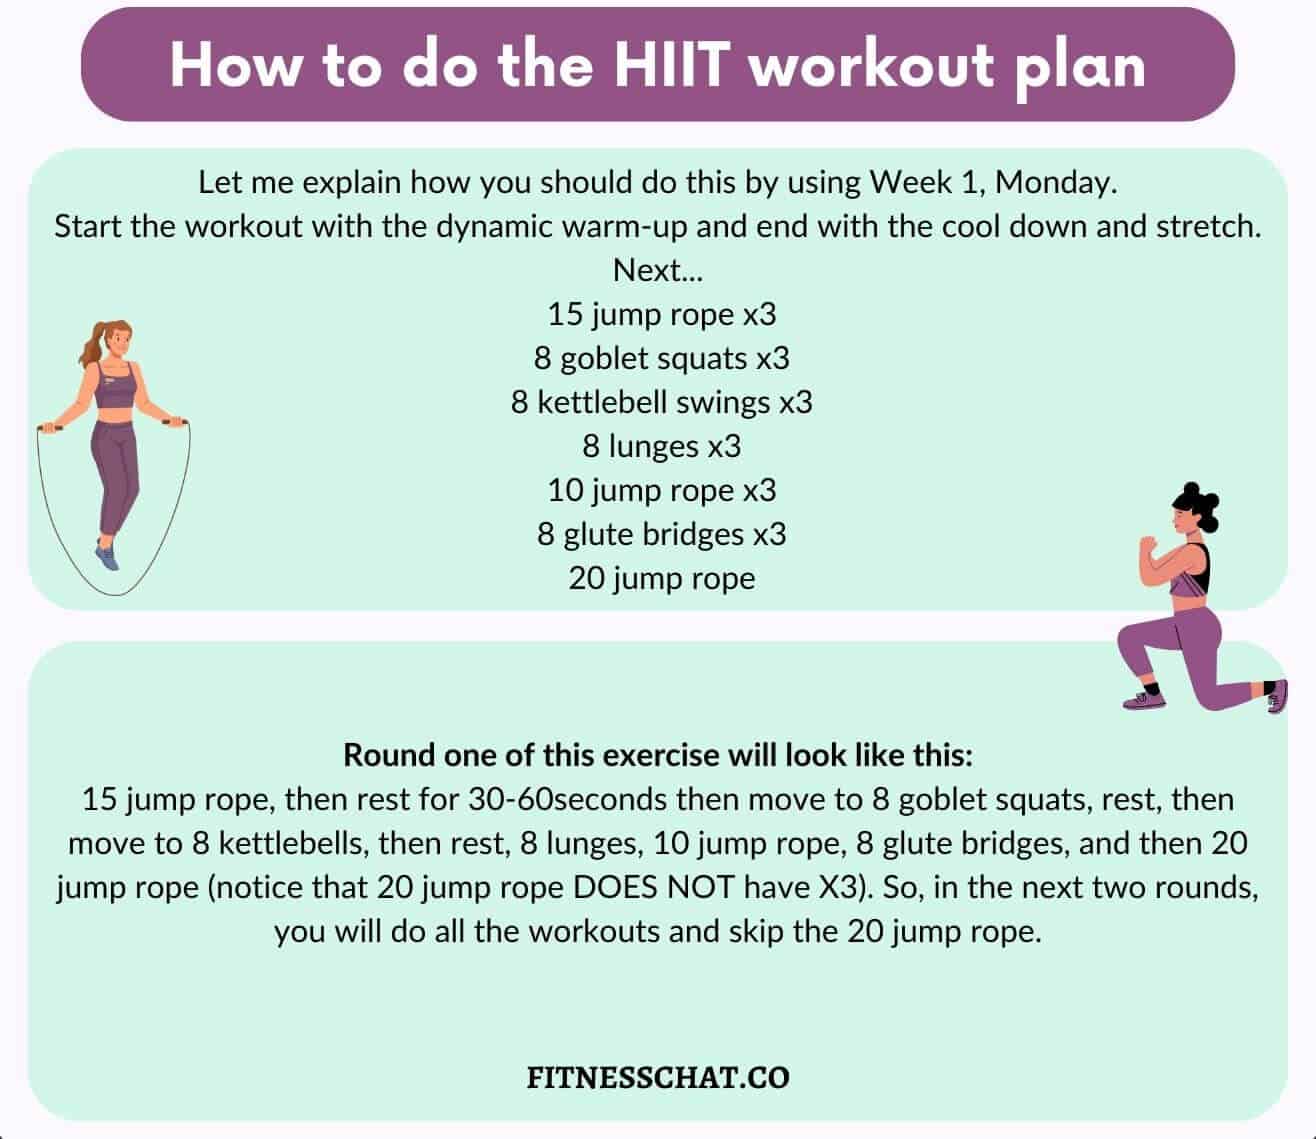 How to do the HIIT workout plan for beginners 